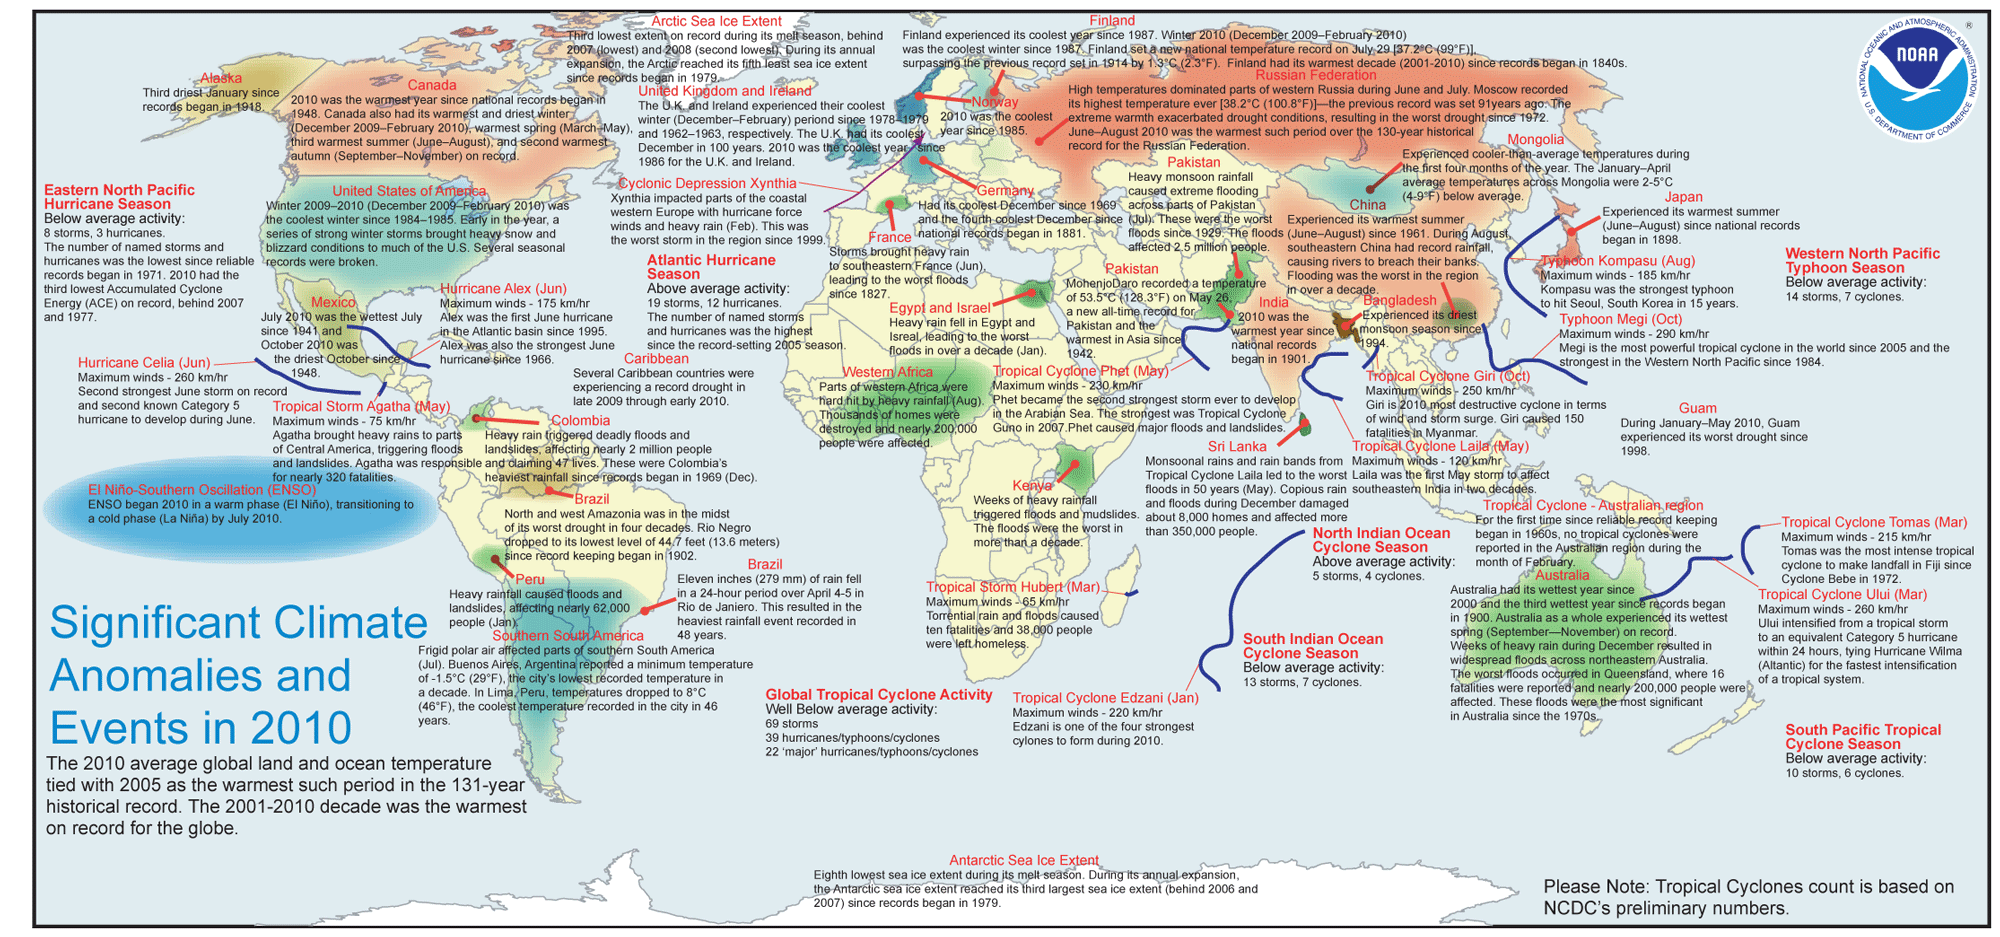 Significant Climate Anomalies and Events in 2010